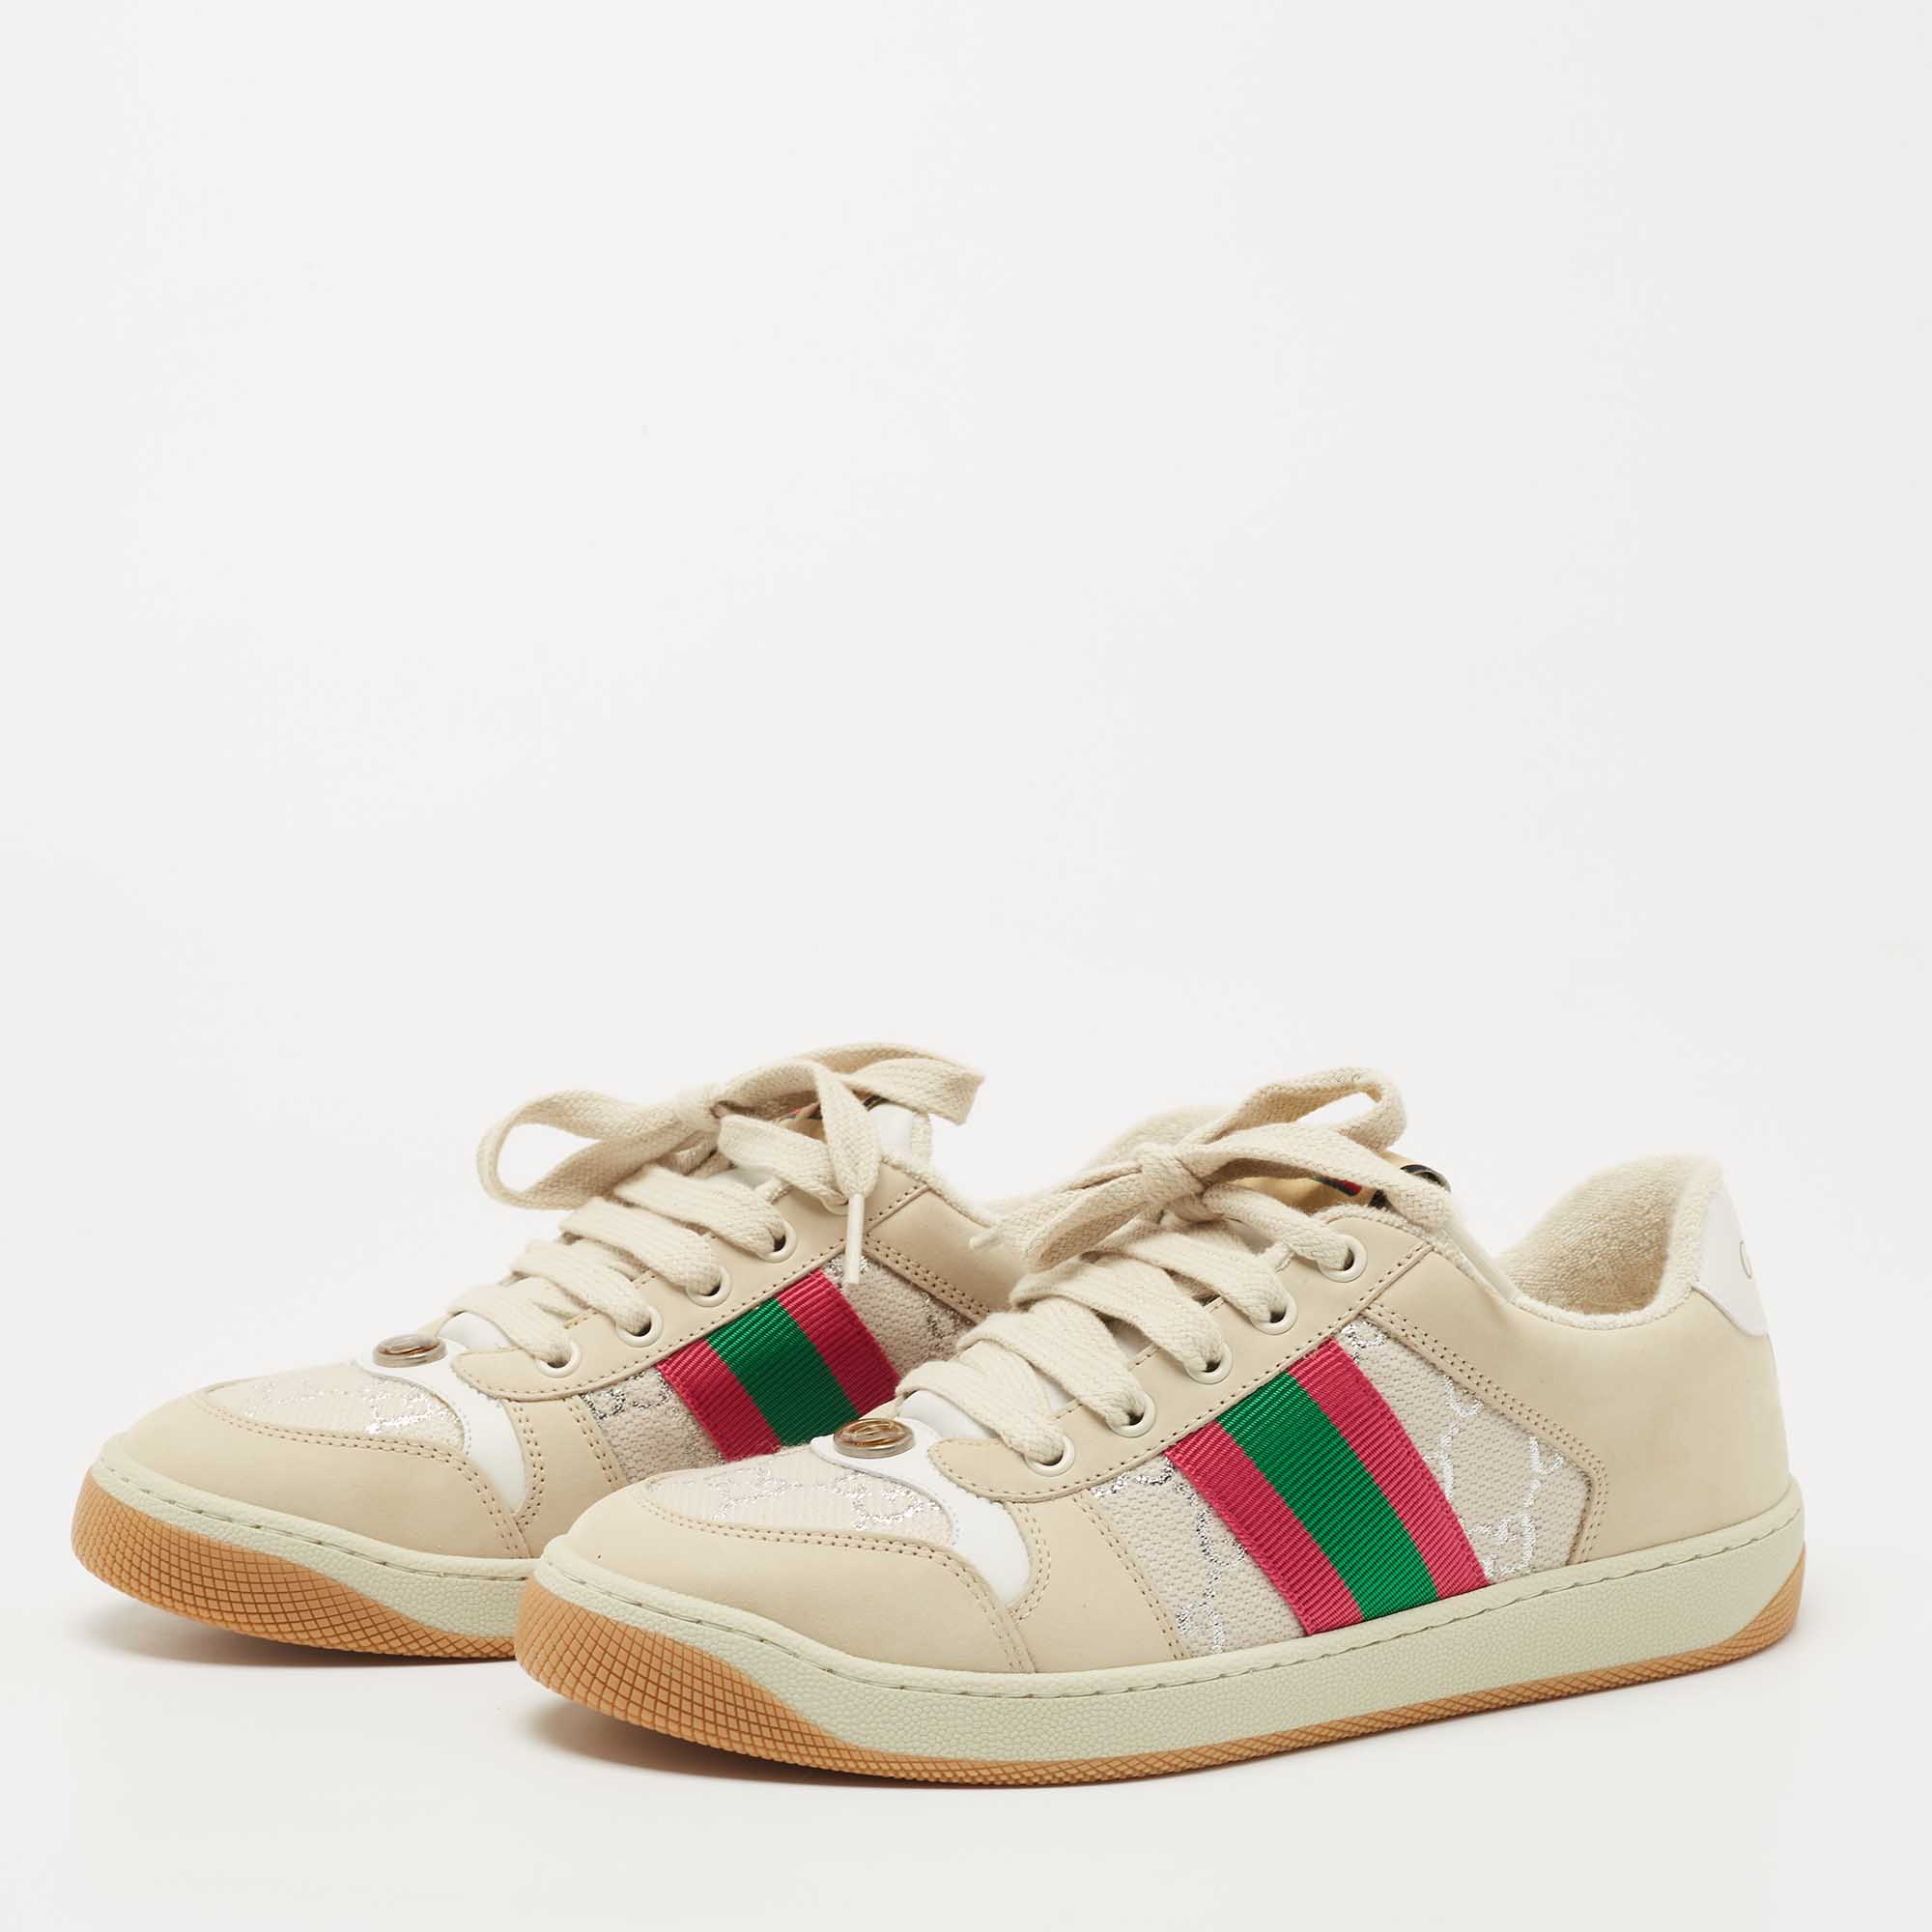 

Gucci Multicolor Nubuck Leather Cotton Blend Screener Low Top Sneakers Size